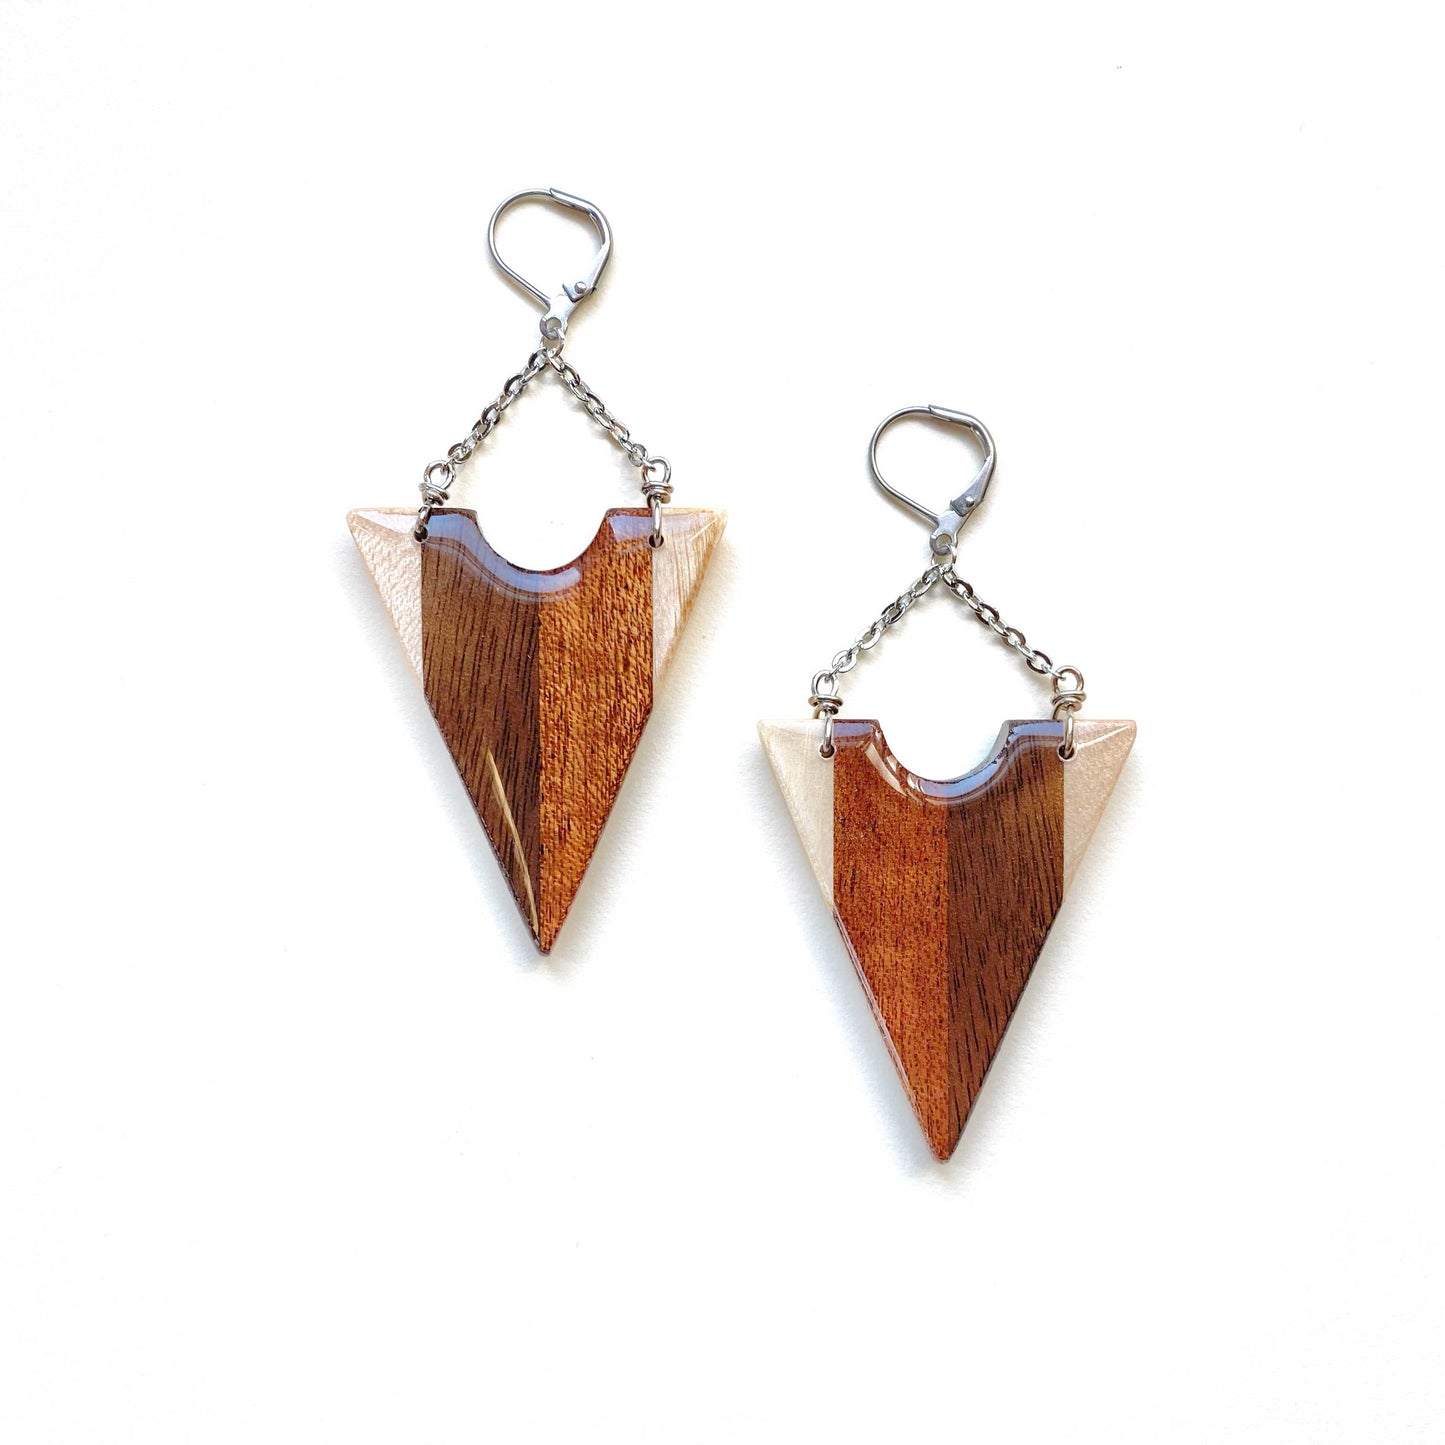 Large Triangle with Chain Reclaimed Wood Earrings